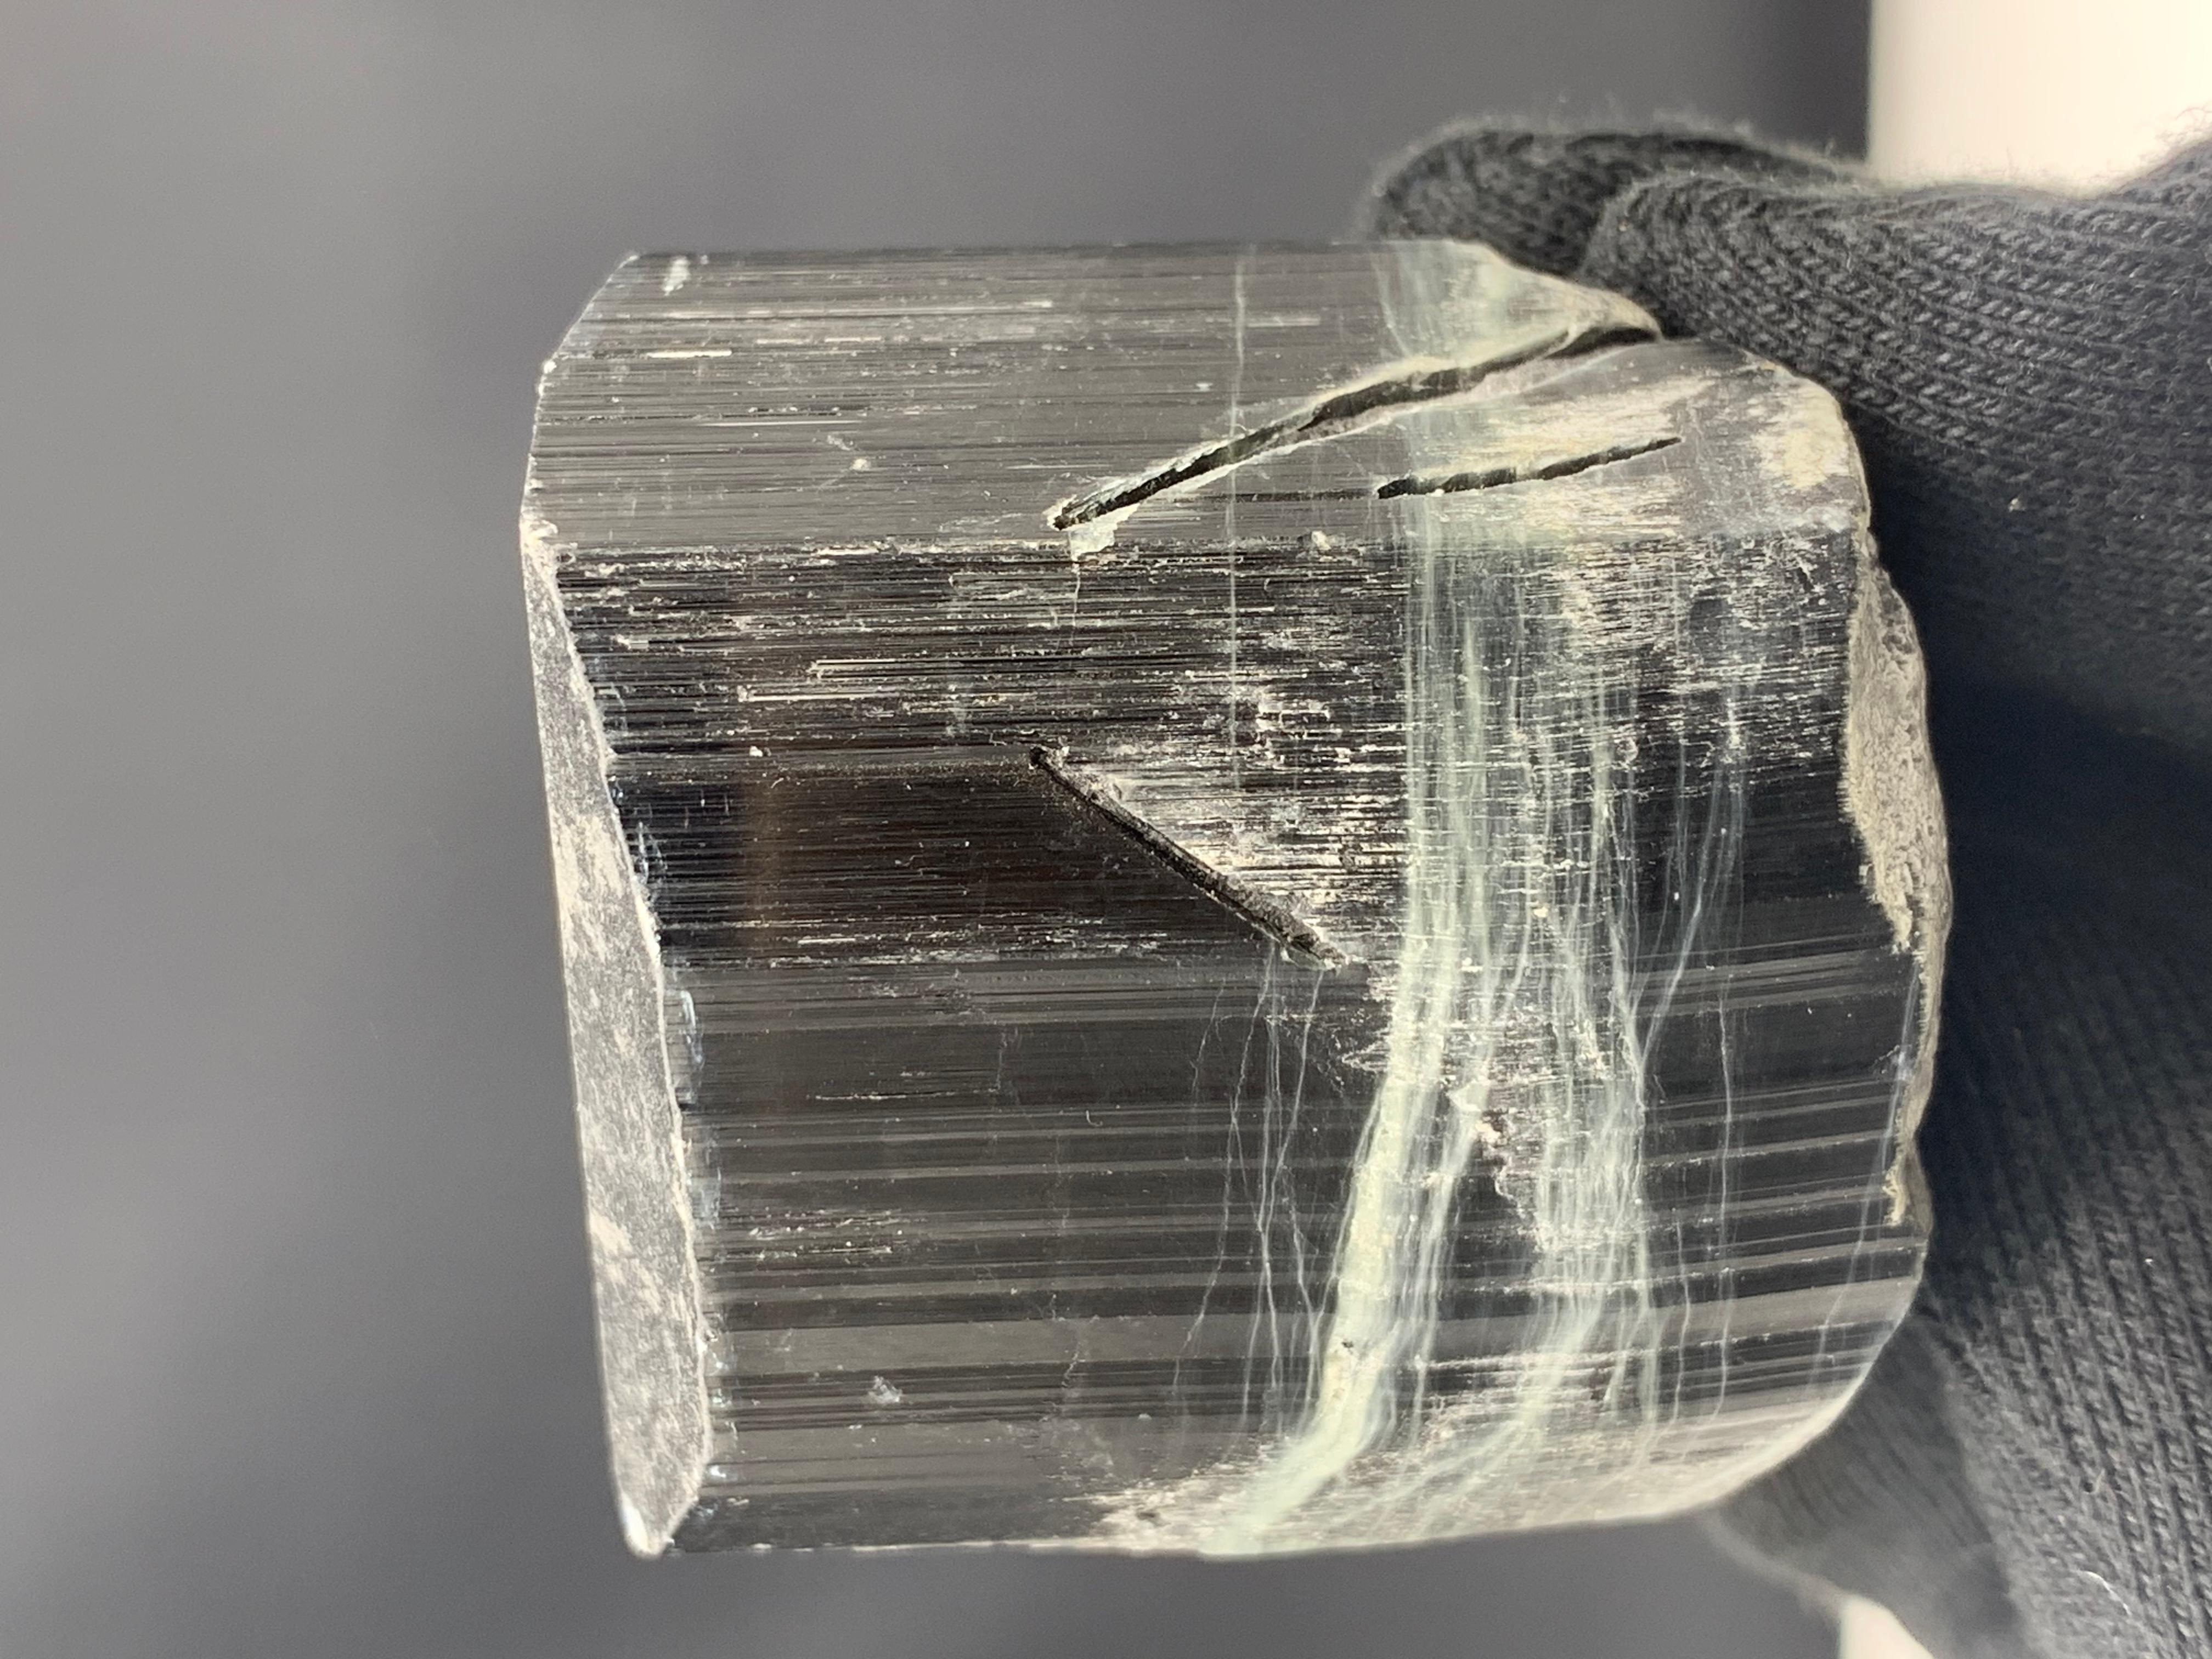 Beautiful Black Tourmaline Crystal From Afghanistan 
Weight: 255.07 Gram
Dimension : 5 x 4.7 x 5.2 Cm 
Origin : kunar, Afghanistan 

Tourmaline is a crystalline silicate mineral group in which boron is compounded with elements such as aluminium,